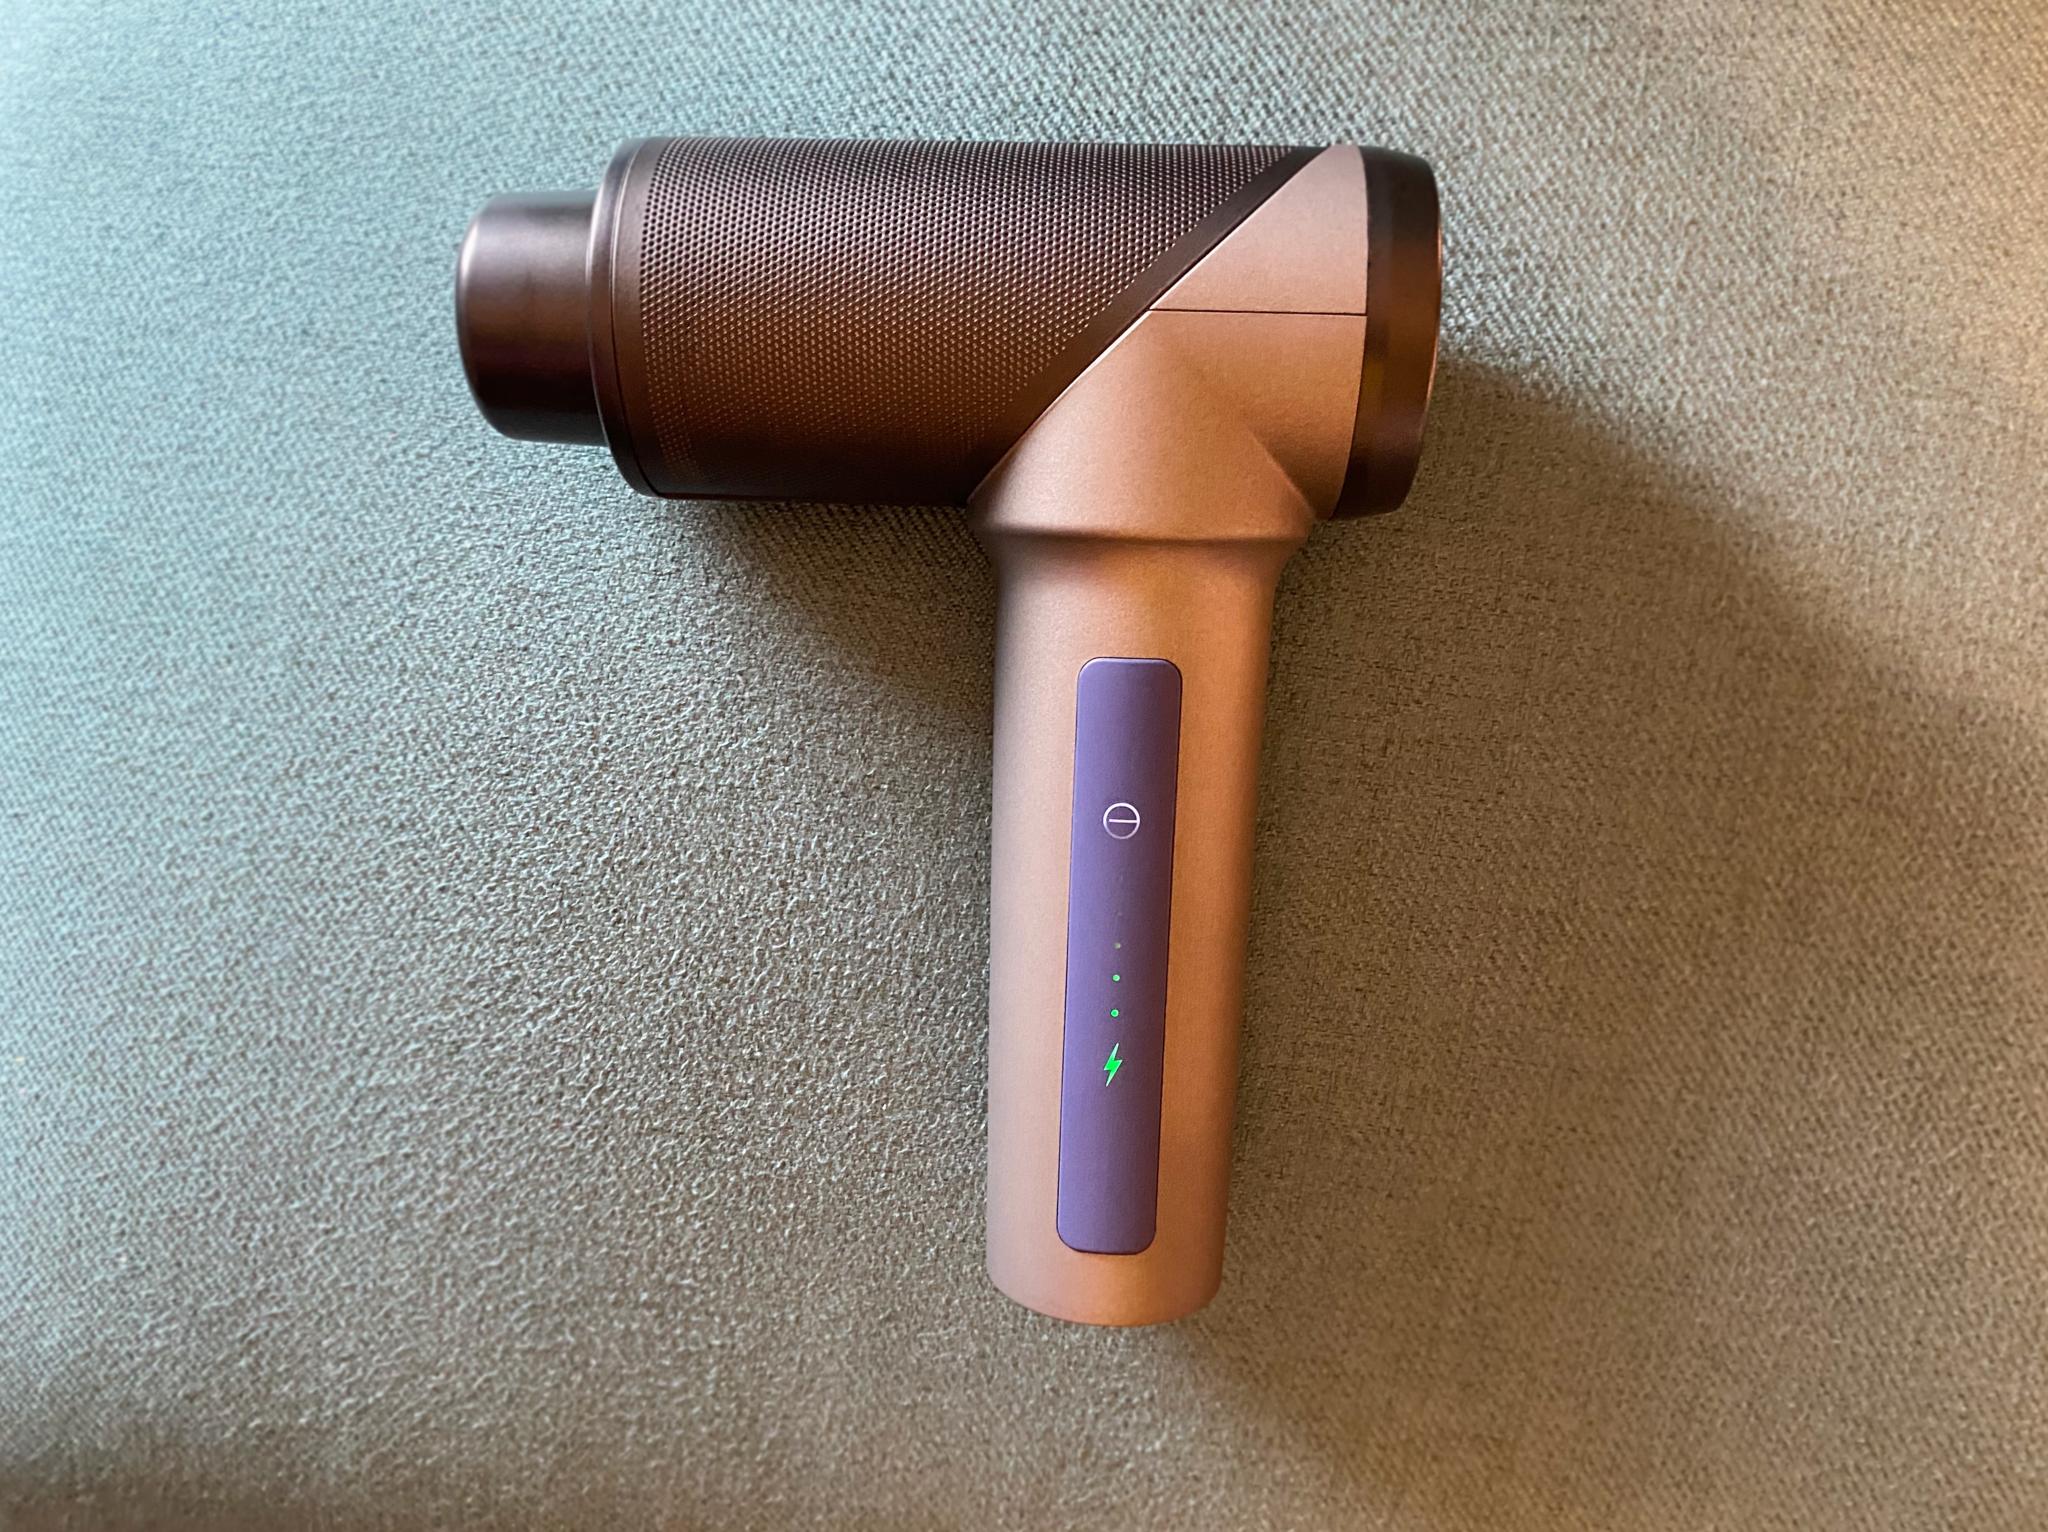 Sportneer Percussion Massager Review Powered